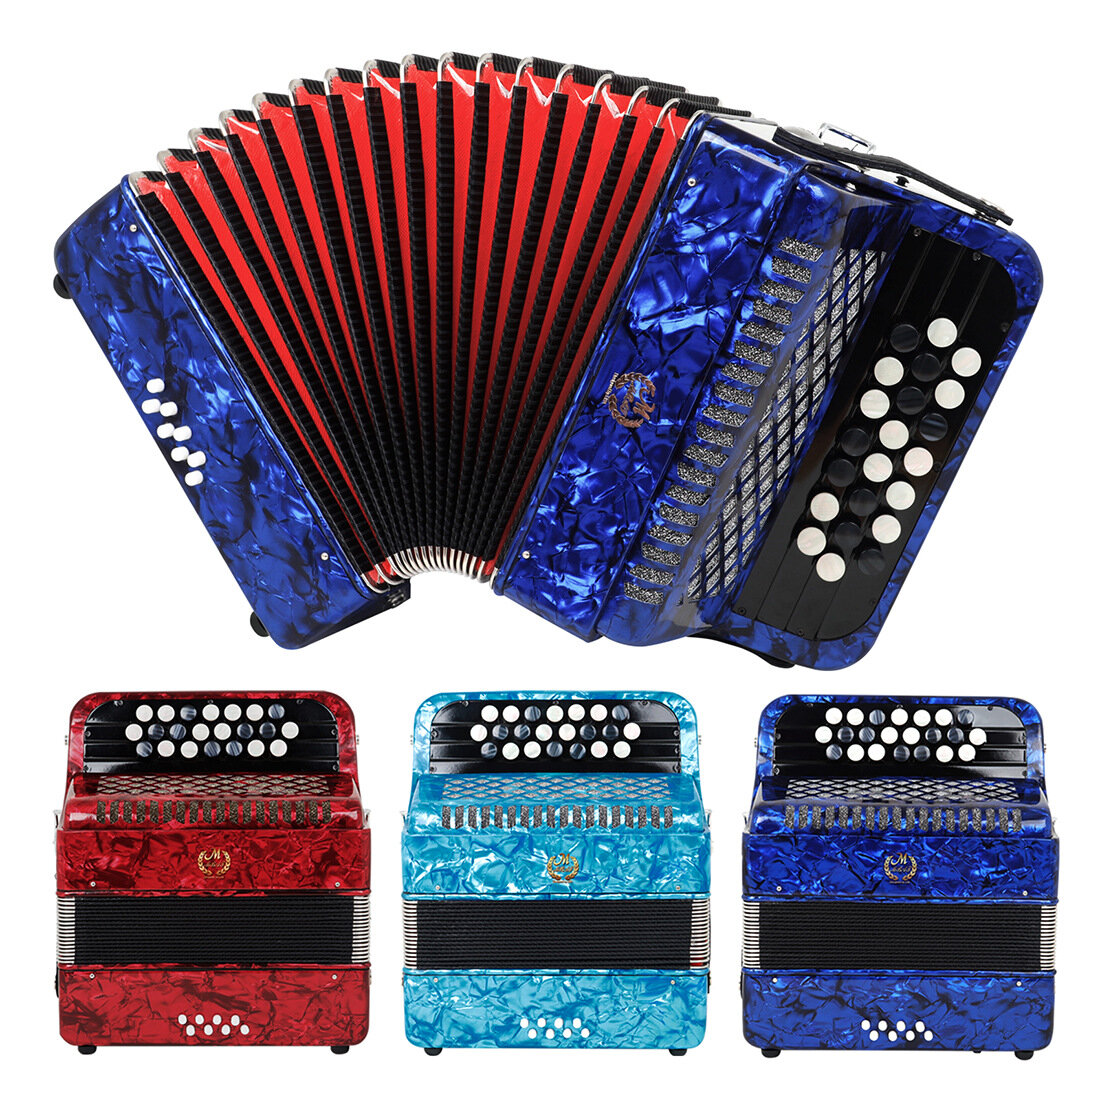 M MBAT 22 Key 8 Bass Mini Accordion Educational Musical Instrument Toy Bayan Accordion for Kids Chil